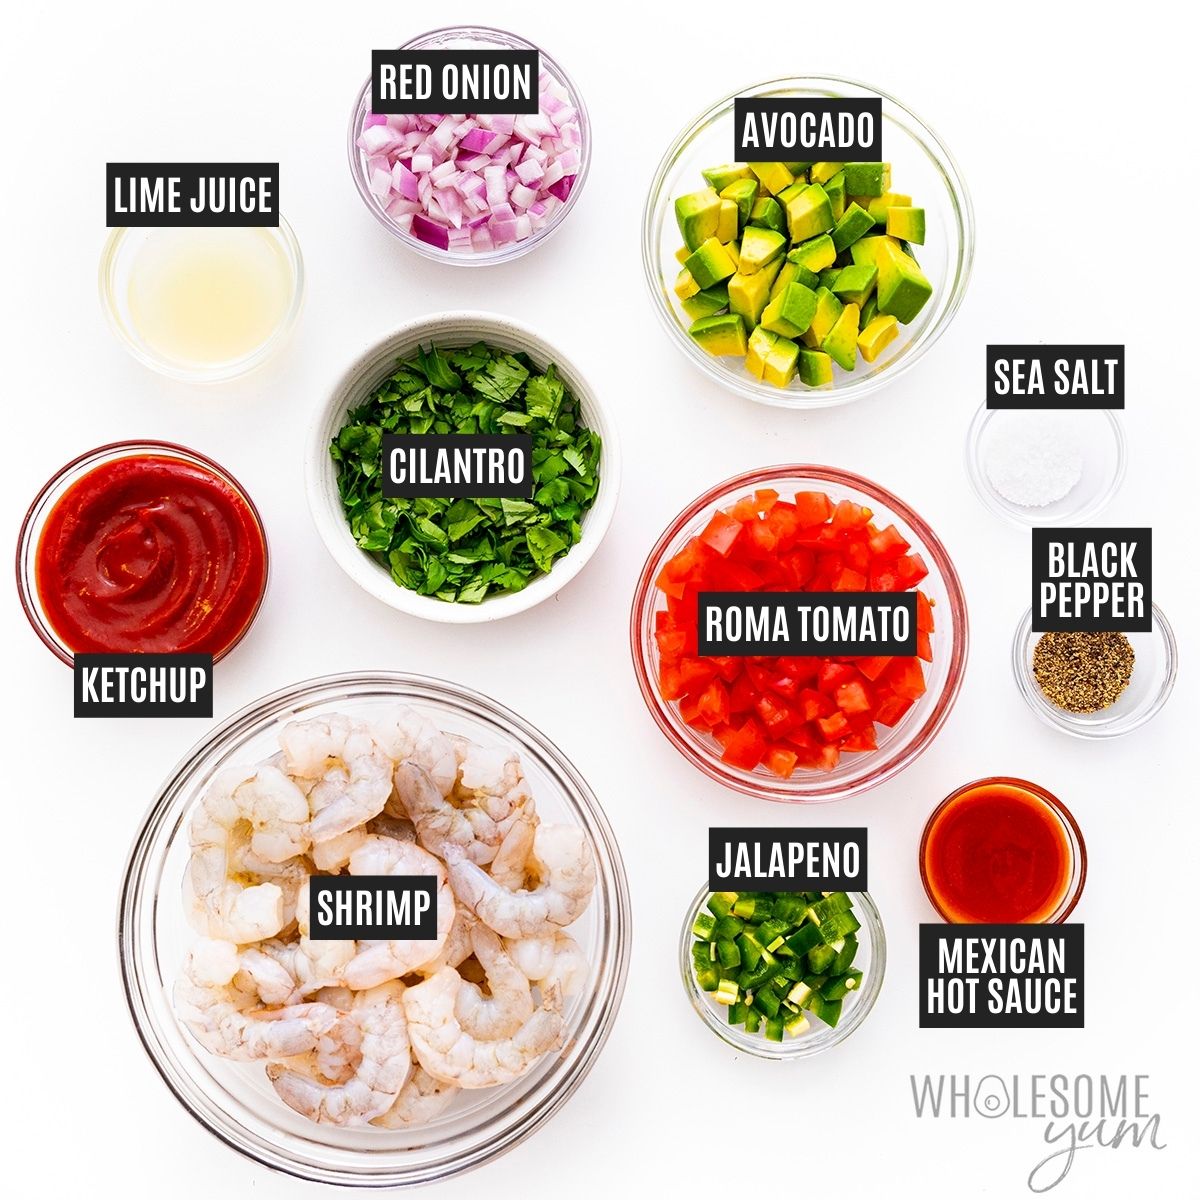 Bowl of shrimp next to tomatoes, cilantro, avocado, red onions, and other sauce ingredients in small bowls with labels.